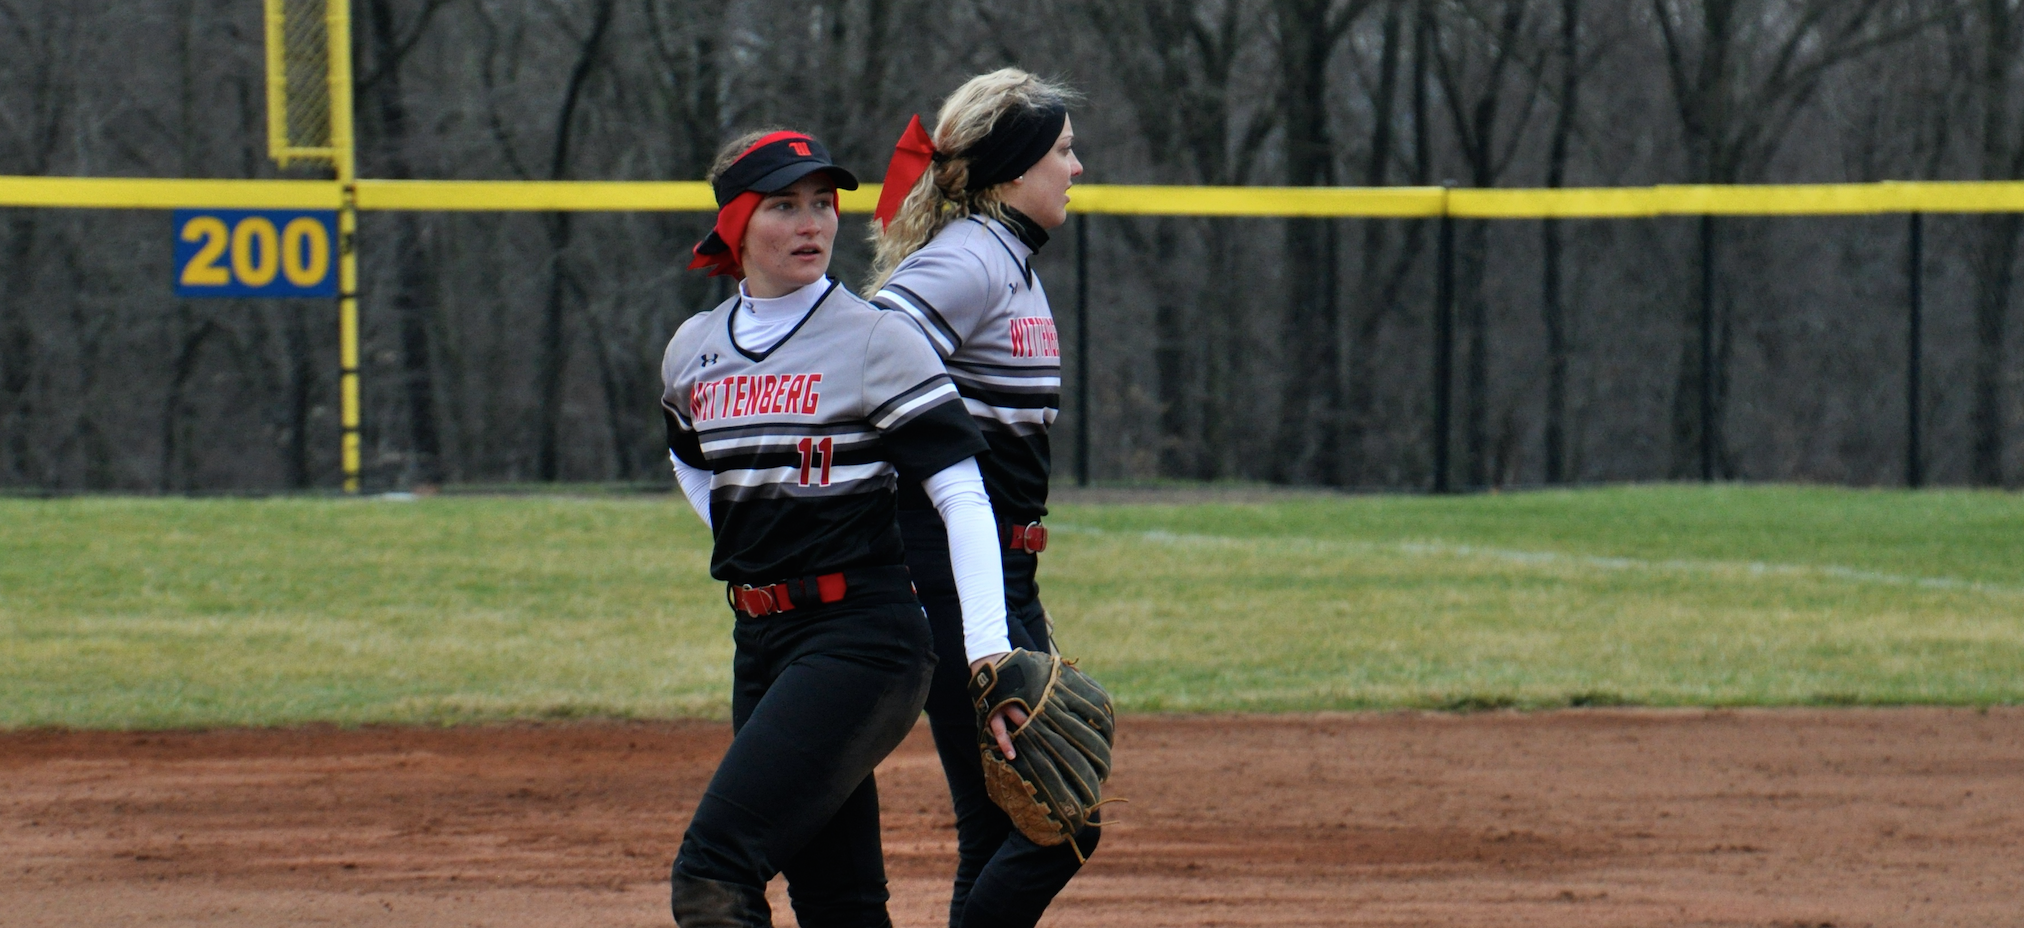 #24 Wittenberg Wins Two One-Run Contests to Remain Unblemished in NCAC Play